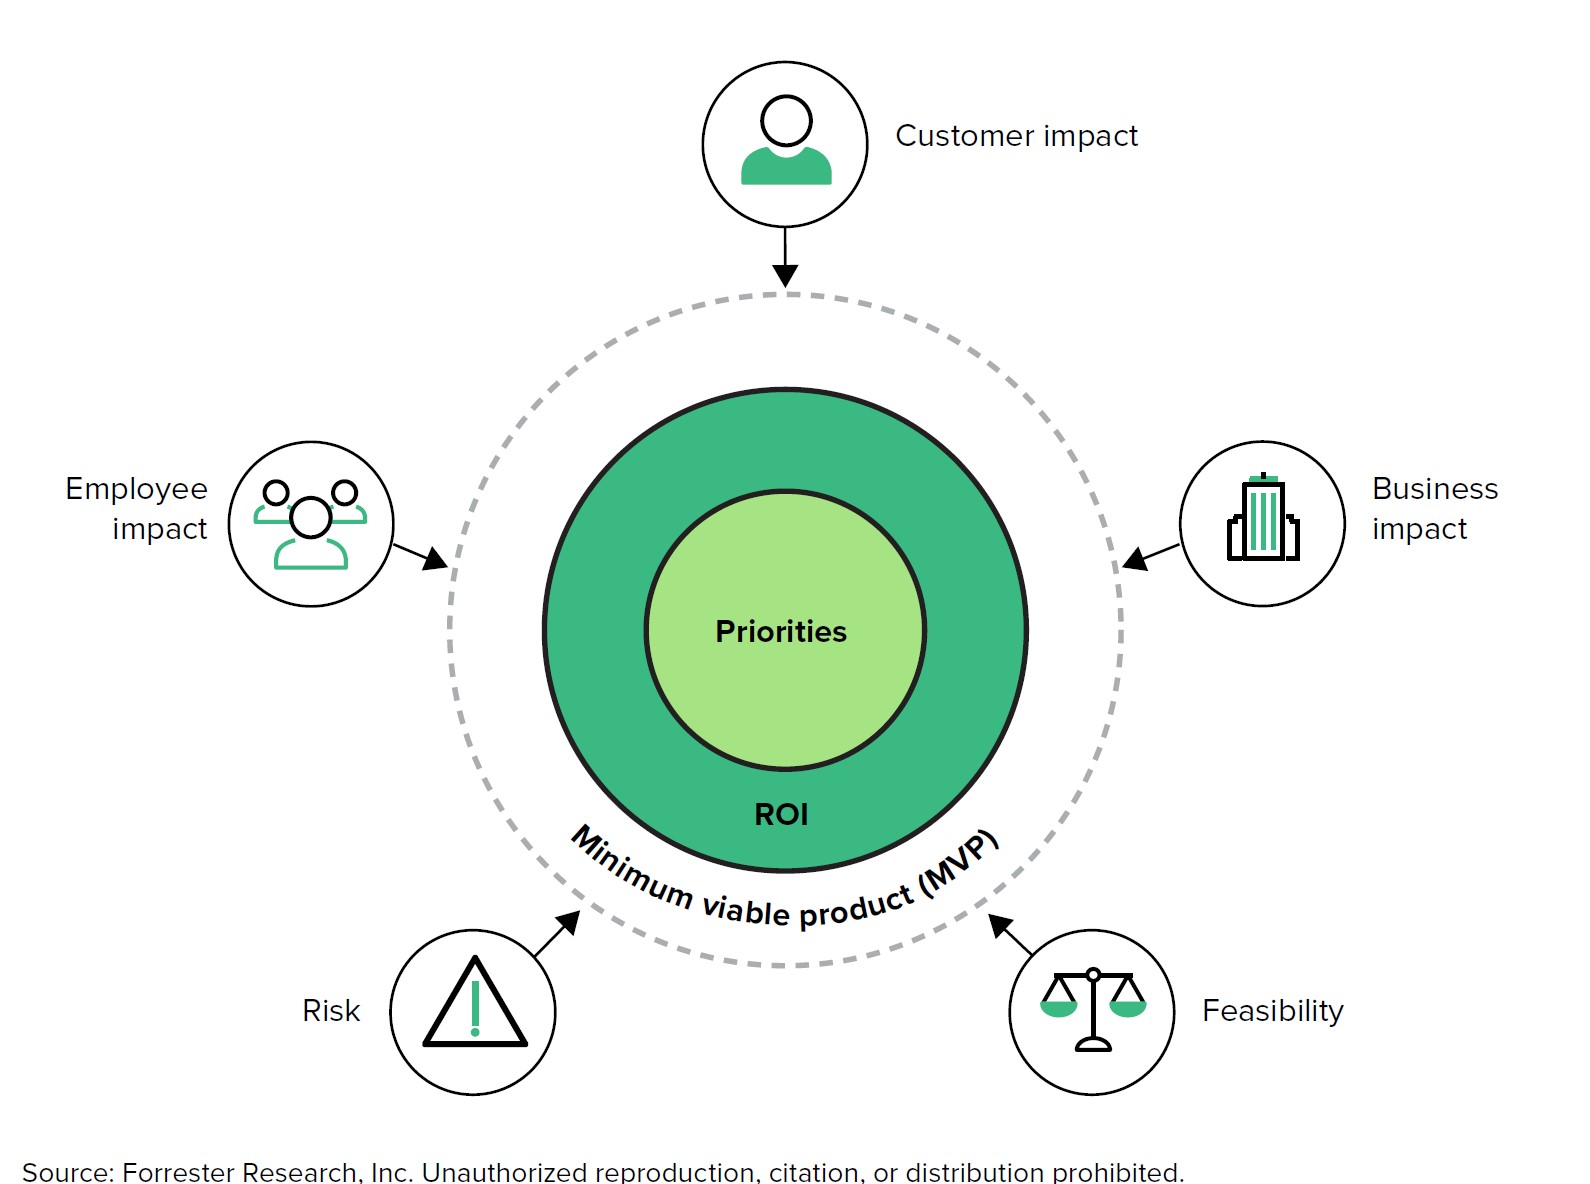 Forrester’s Digital Initiative Prioritization Model: In this graphic, there are three concentric circles denoting priorities, ROI, and minimum viable product (MVP). Labeled icons representing the prioritization categories -- customer impact, employee impact, business impact, feasibility, and risk -- point toward the concentric circles.